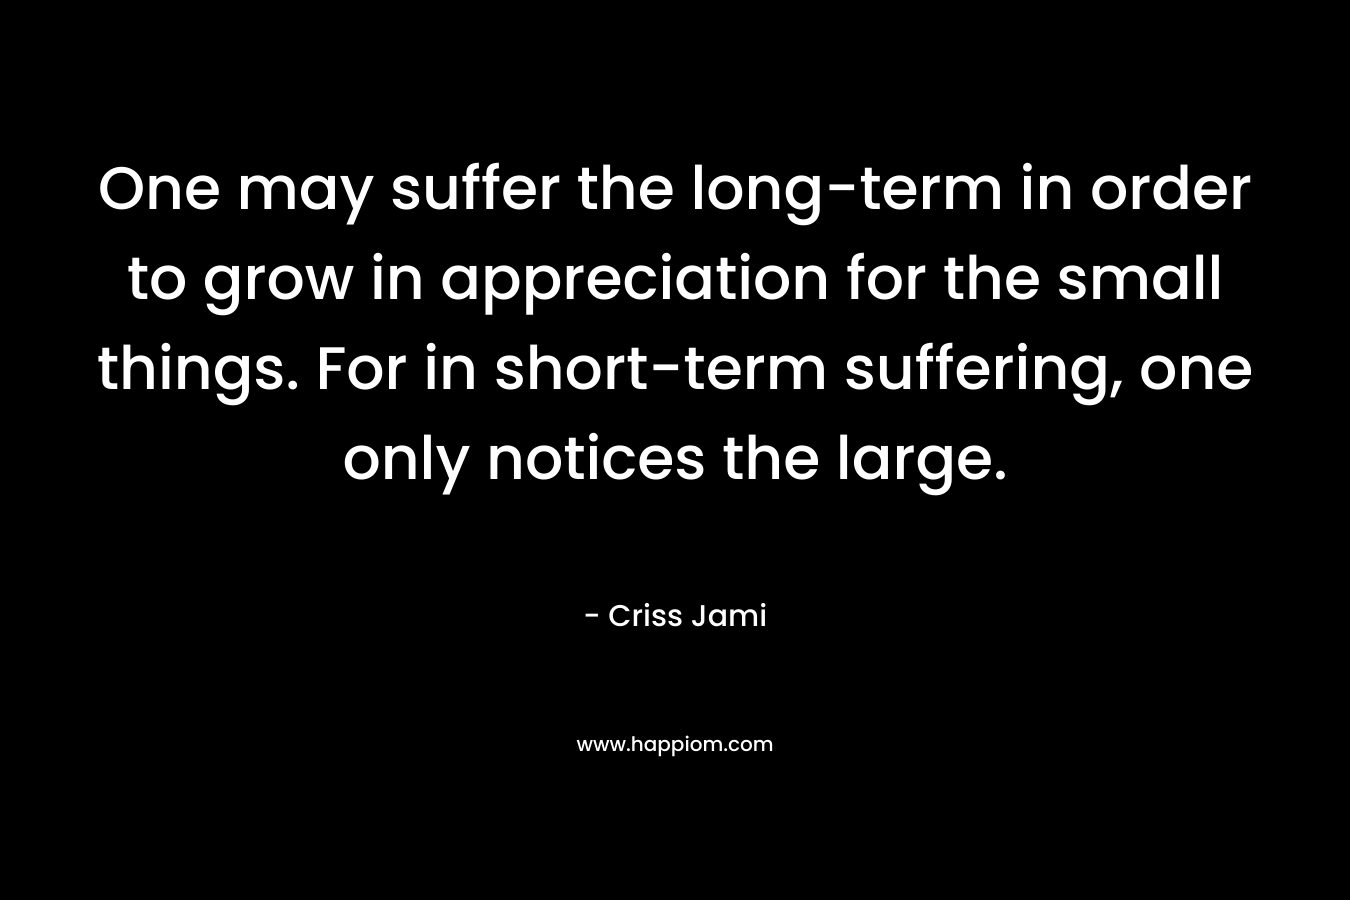 One may suffer the long-term in order to grow in appreciation for the small things. For in short-term suffering, one only notices the large.